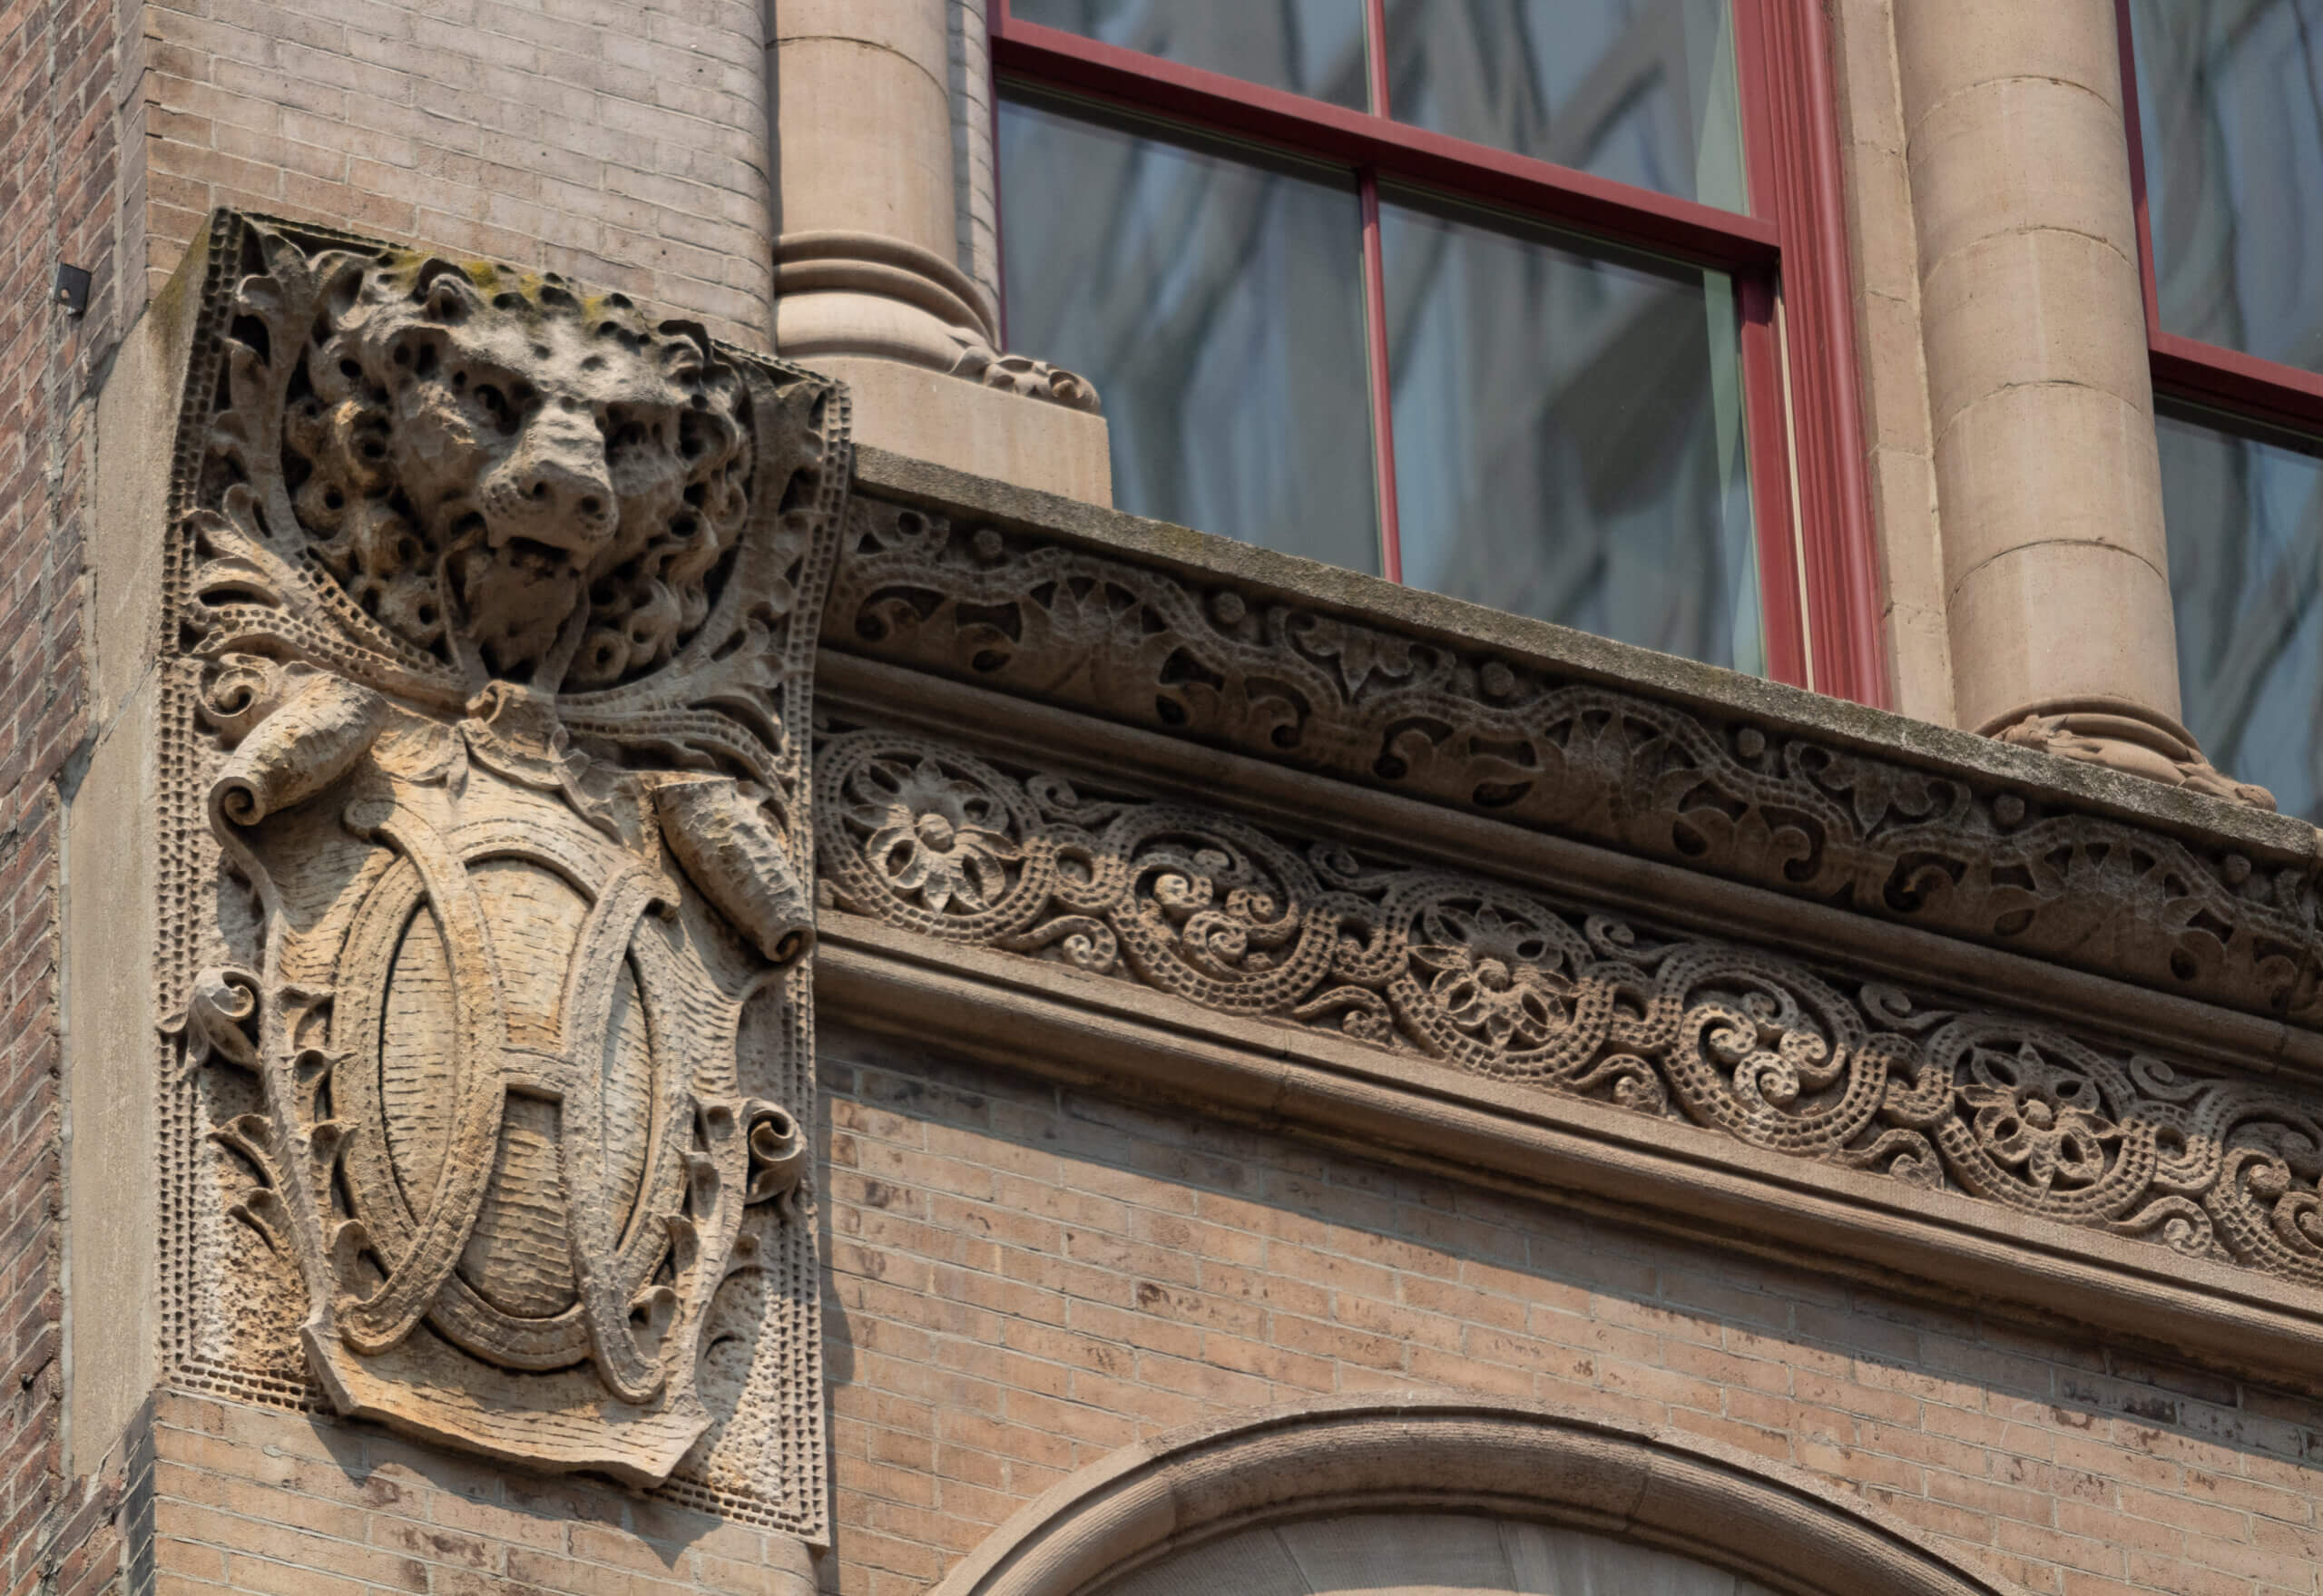 a lion head above the letter H are included in the ornamentation on the building